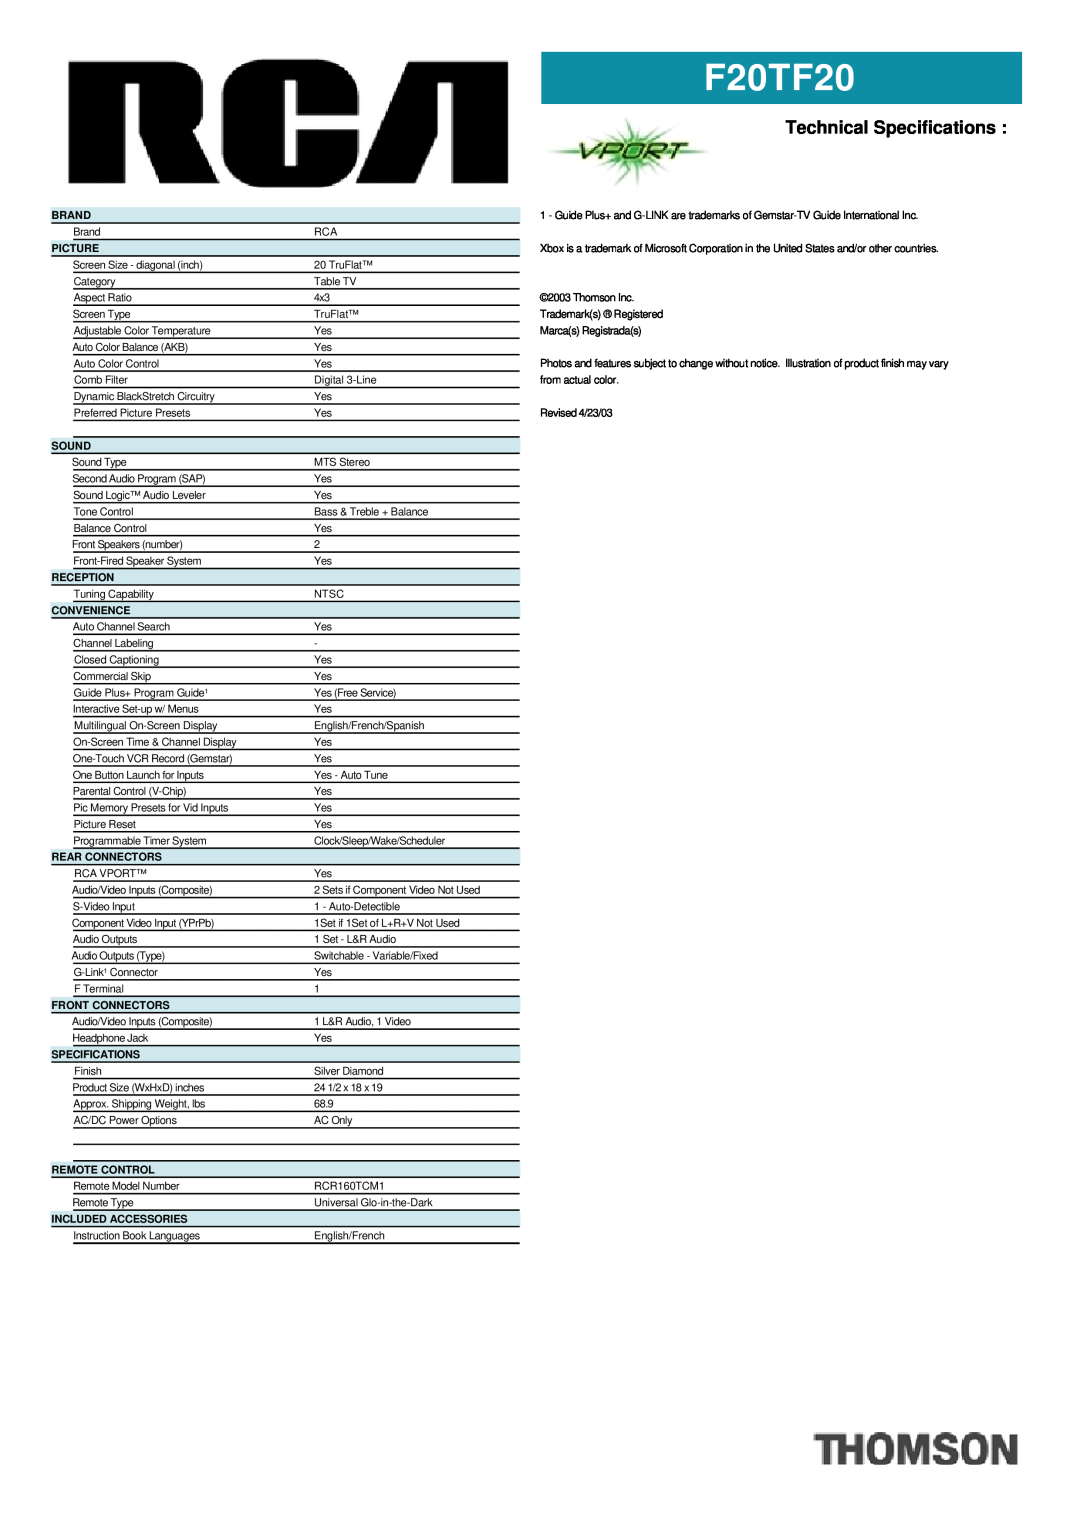 RCA F20TF20 manual Technical Specifications 